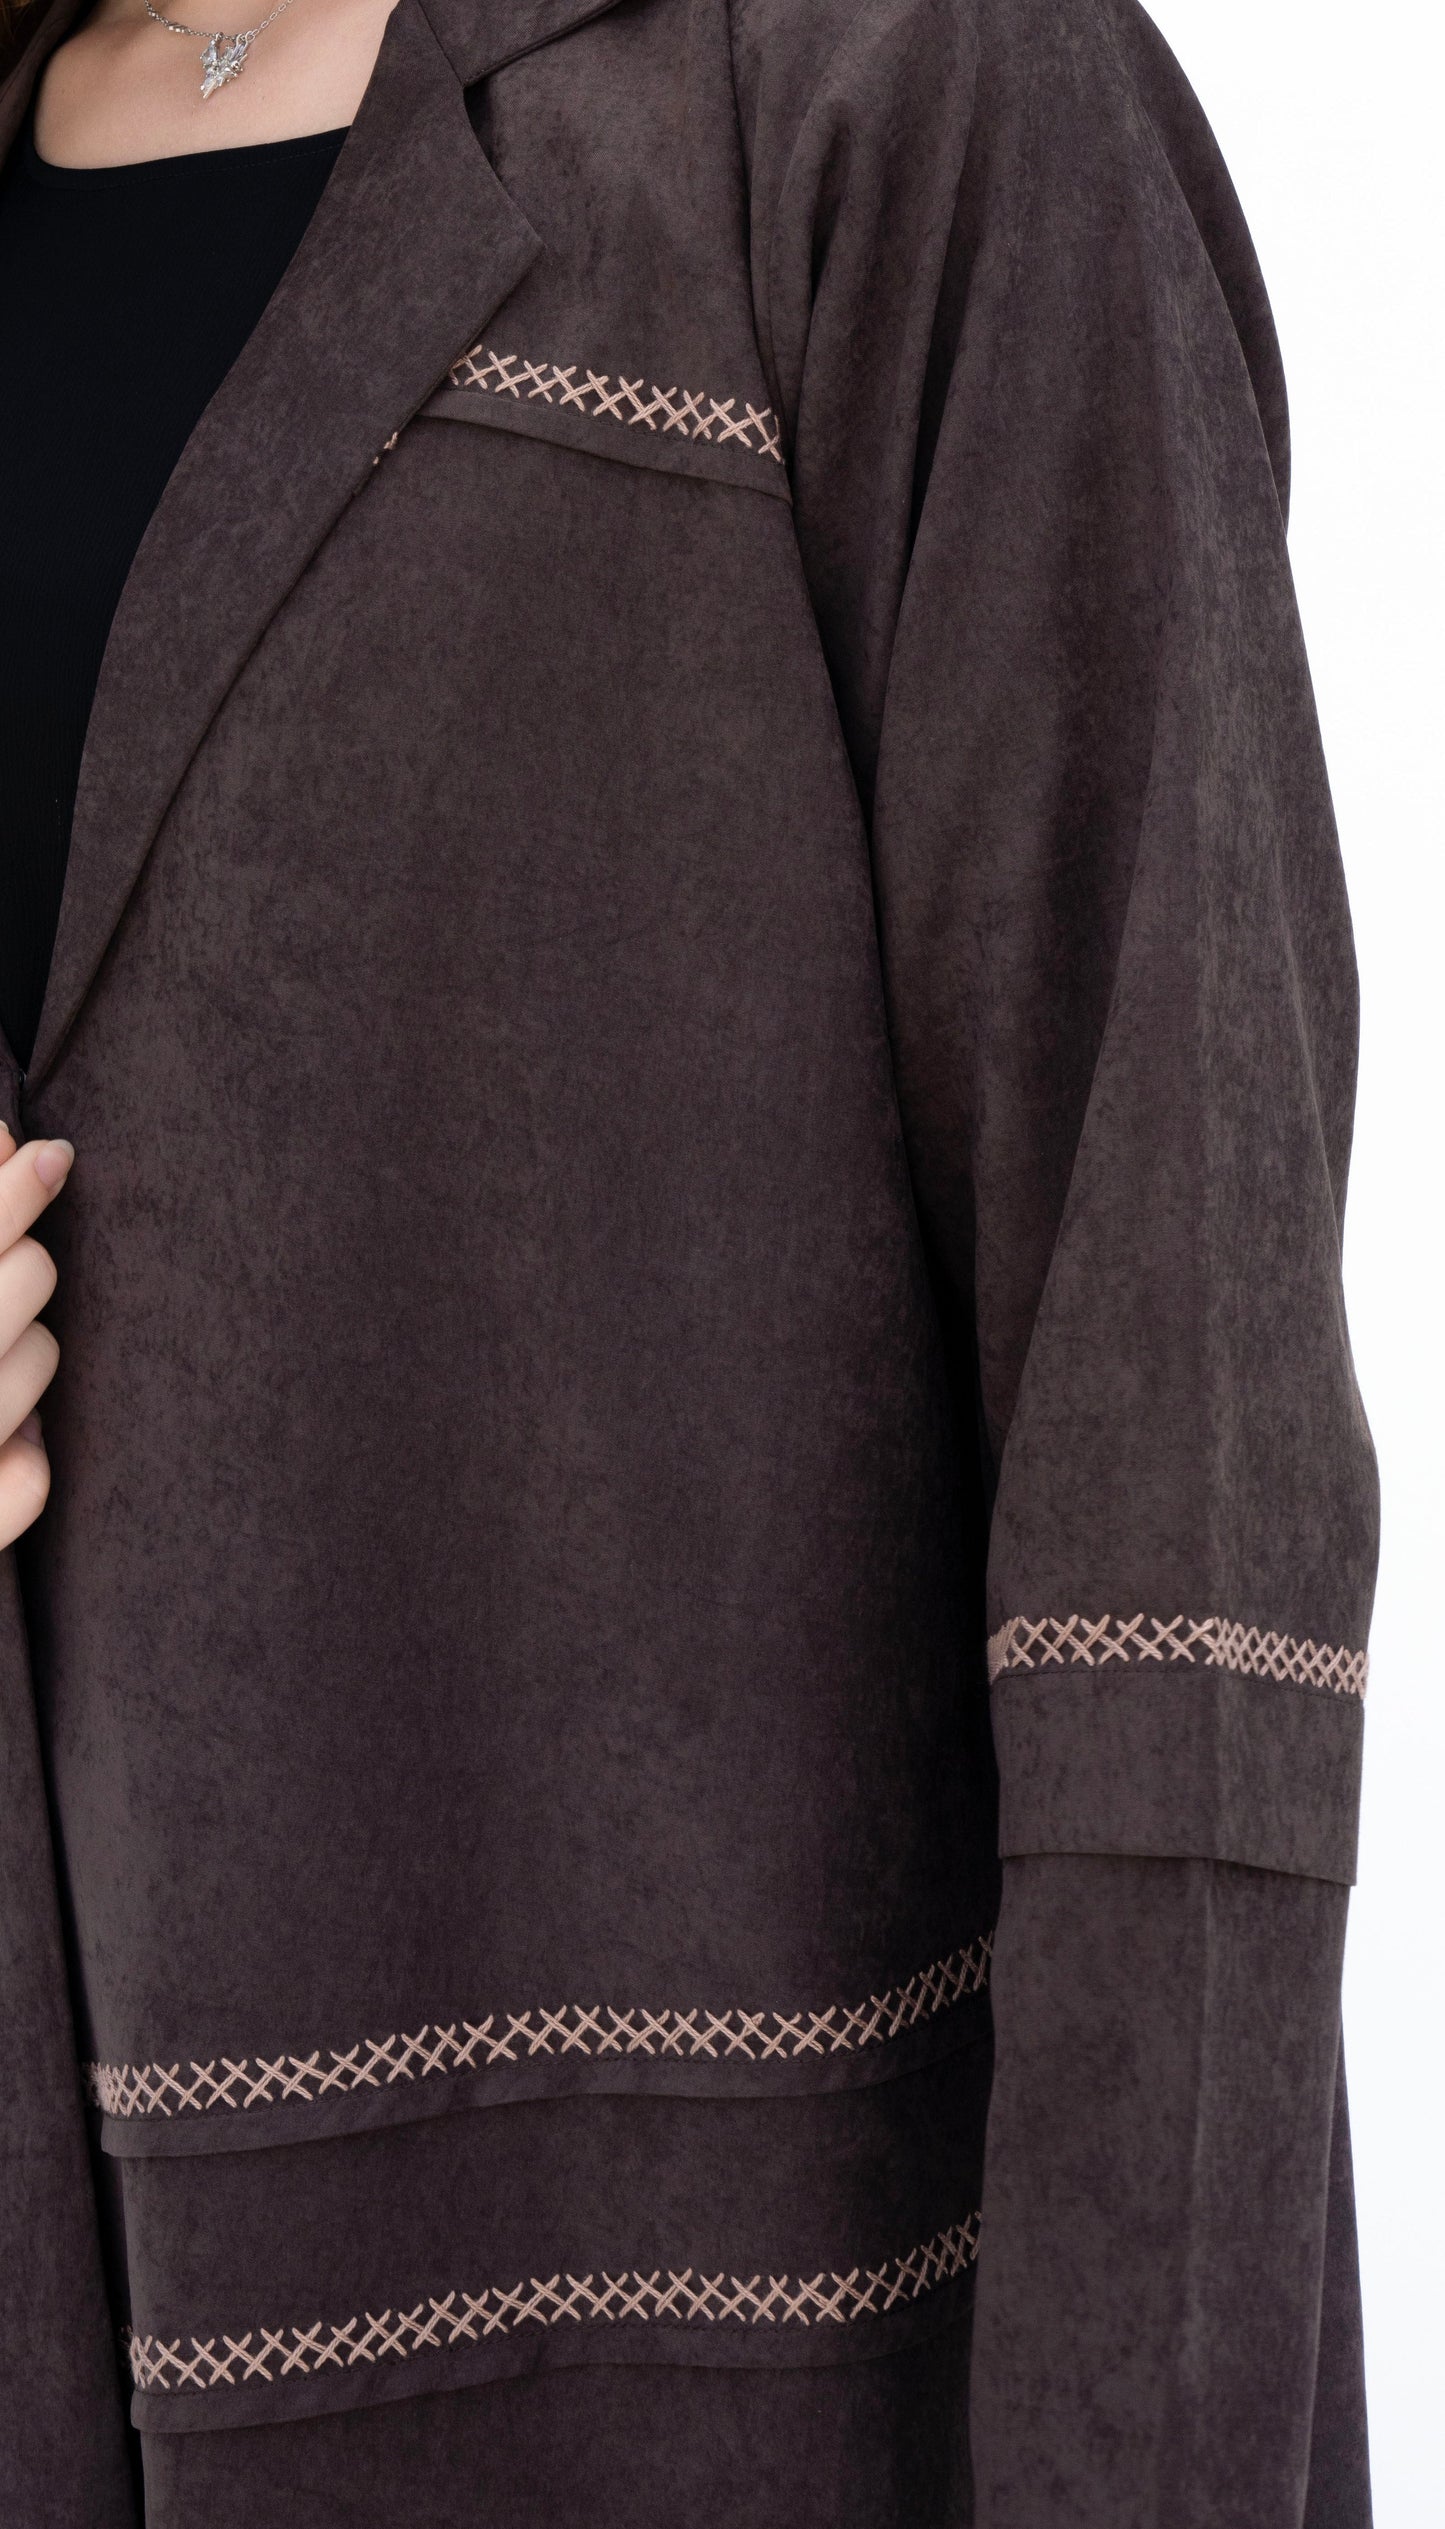 Collar Abaya With Blanket Stitch Detailing On Front And Sleeve